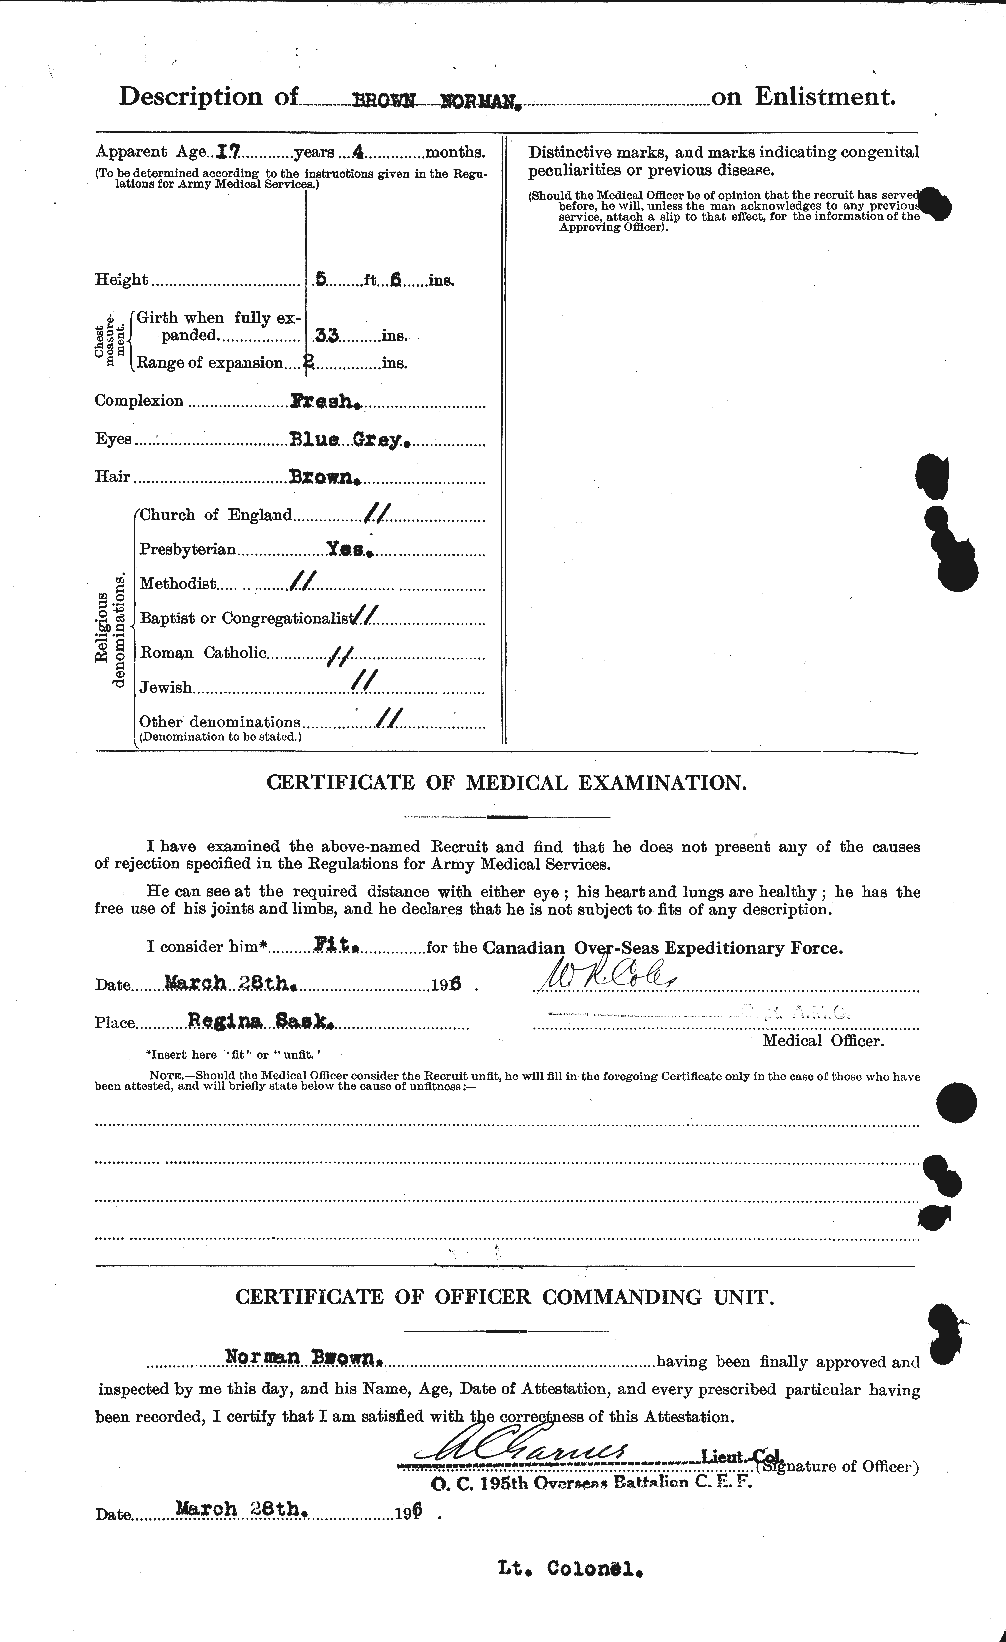 Personnel Records of the First World War - CEF 267100b